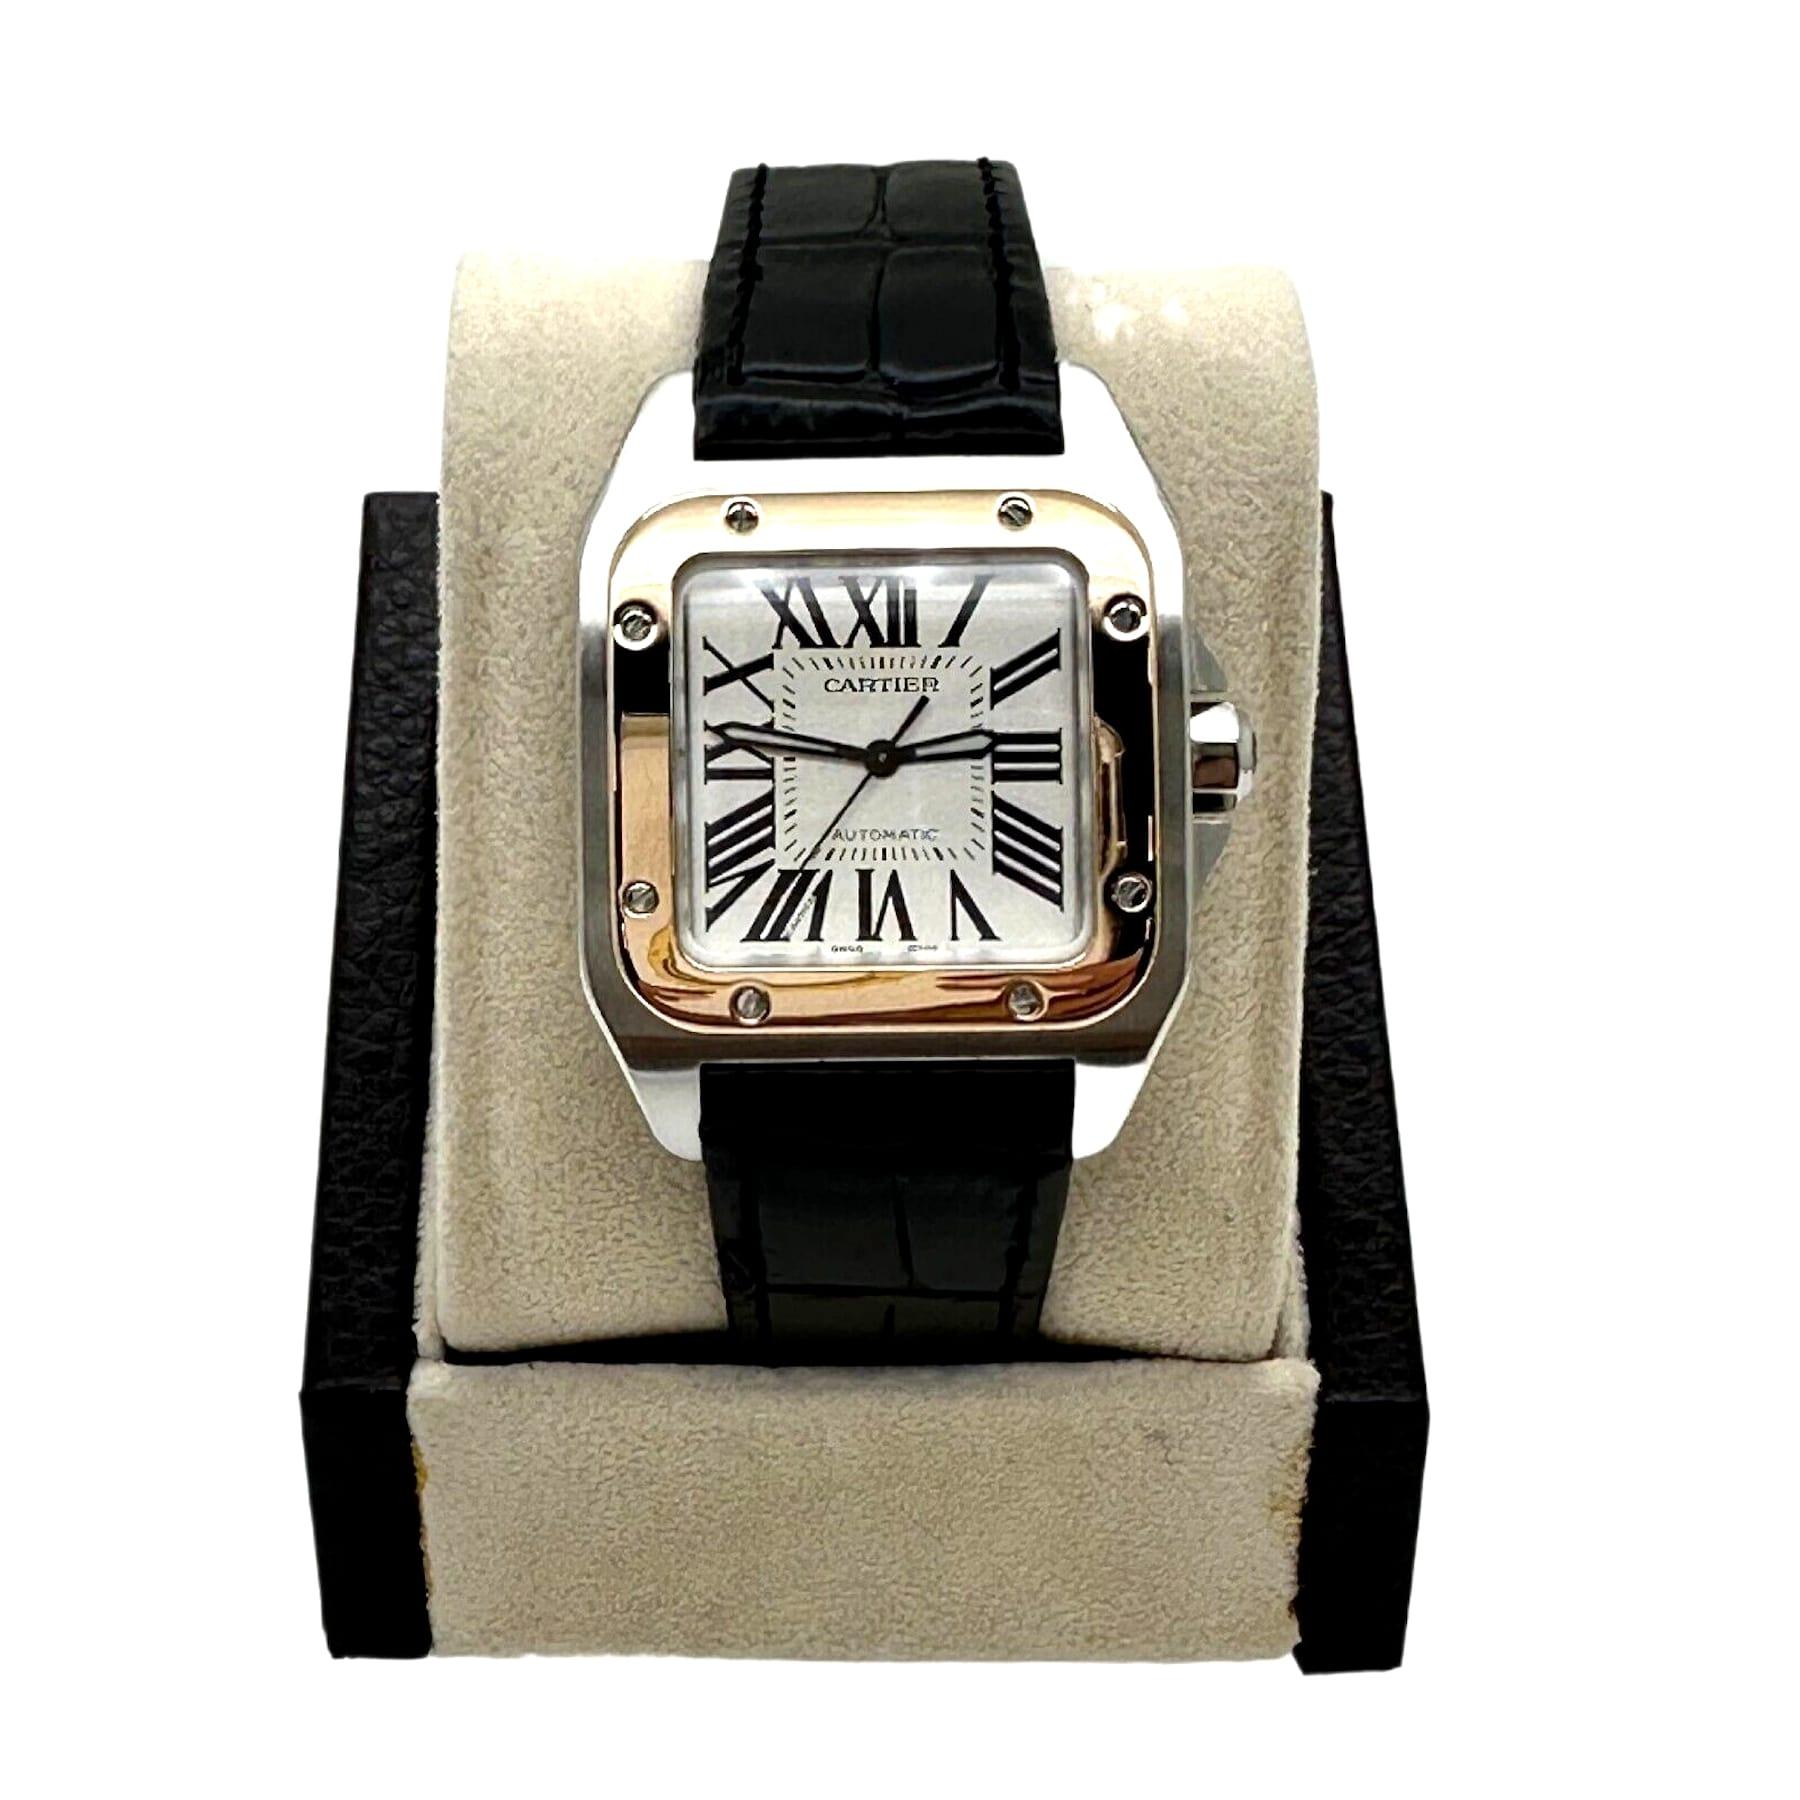 Style Number: Ref 2878

Model: Santos 100

case Material: Stainless Steel 

Band: Custom Black Leather Strap 

Bezel:  18K Rose Gold

Dial: Silver Guilloche Dial 

Face: Sapphire Crystal 

Case Size: 33mm 
 
Includes: 

-Elegant Watch